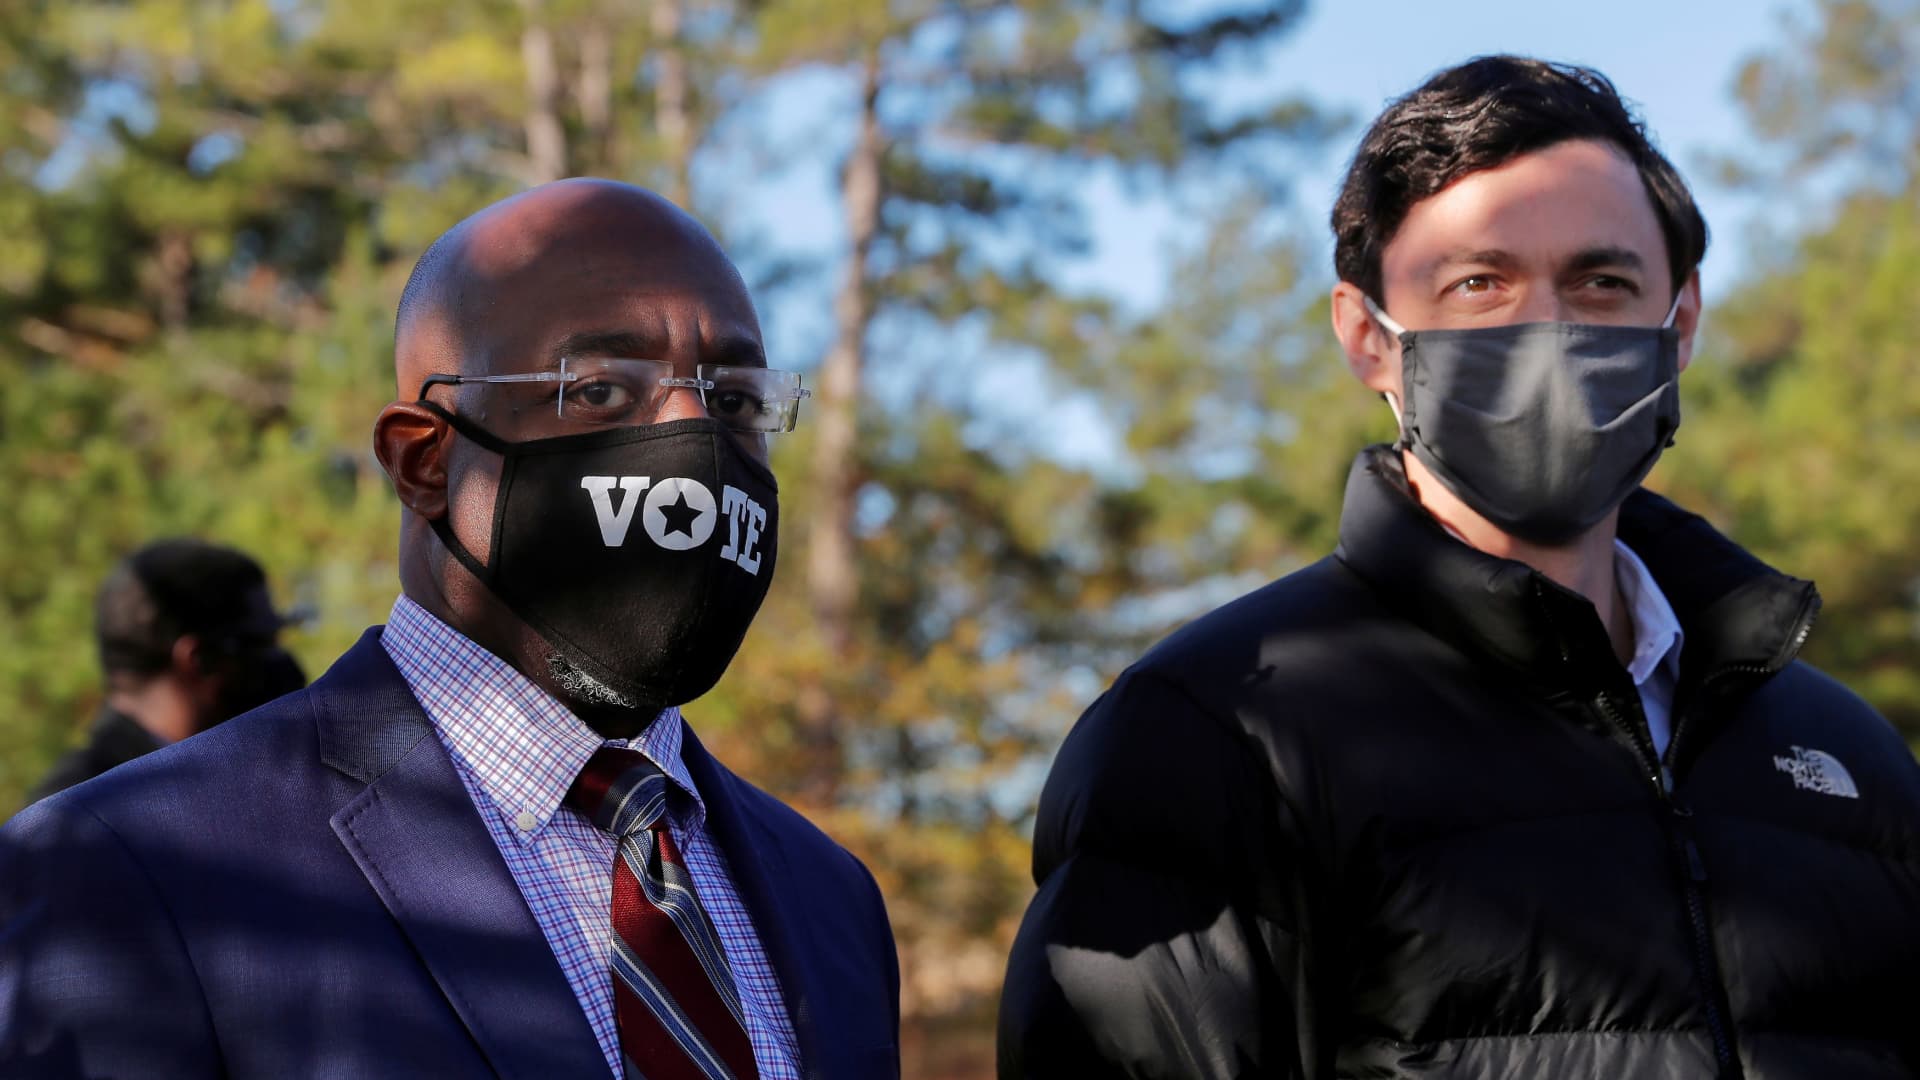 Democratic U.S. Senate candidates Jon Ossoff and Rev. Raphael Warnock look on as they appear together at a campaign rally ahead of U.S. Senate runoff elections in Augusta, Georgia, U.S. January 4, 2021.